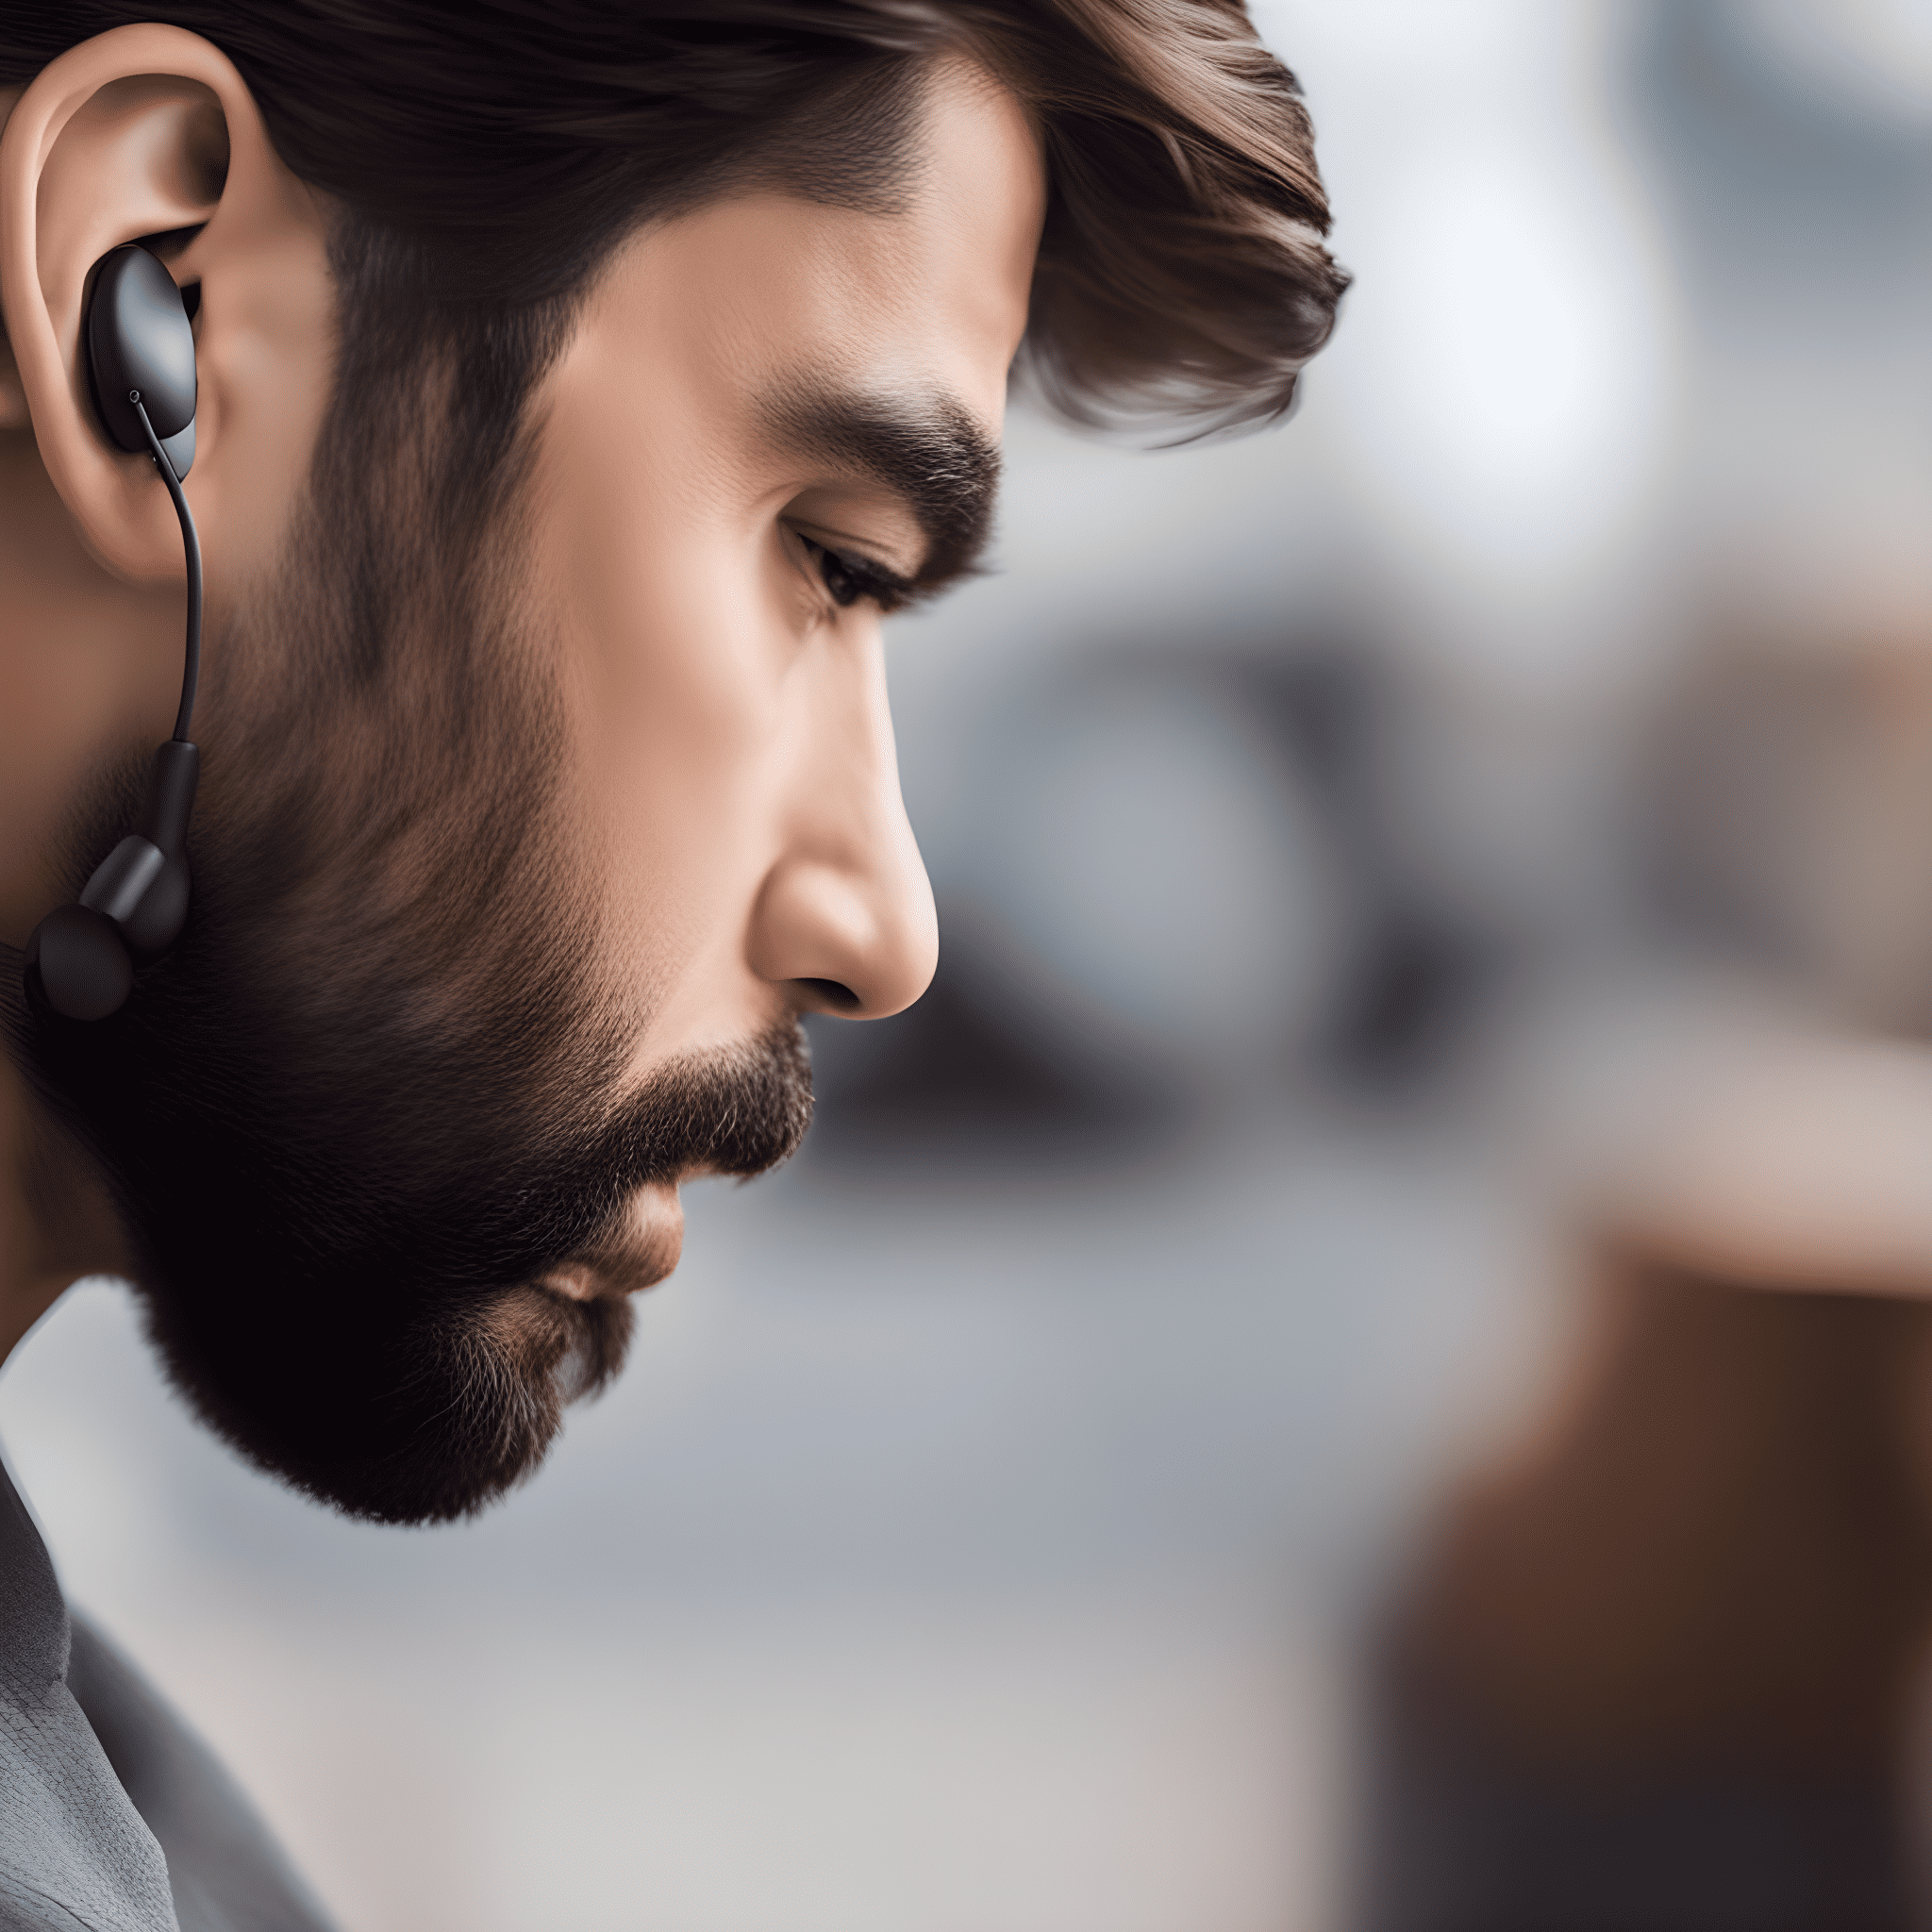 Top Sony Earbuds: Elevating Your Listening Experience